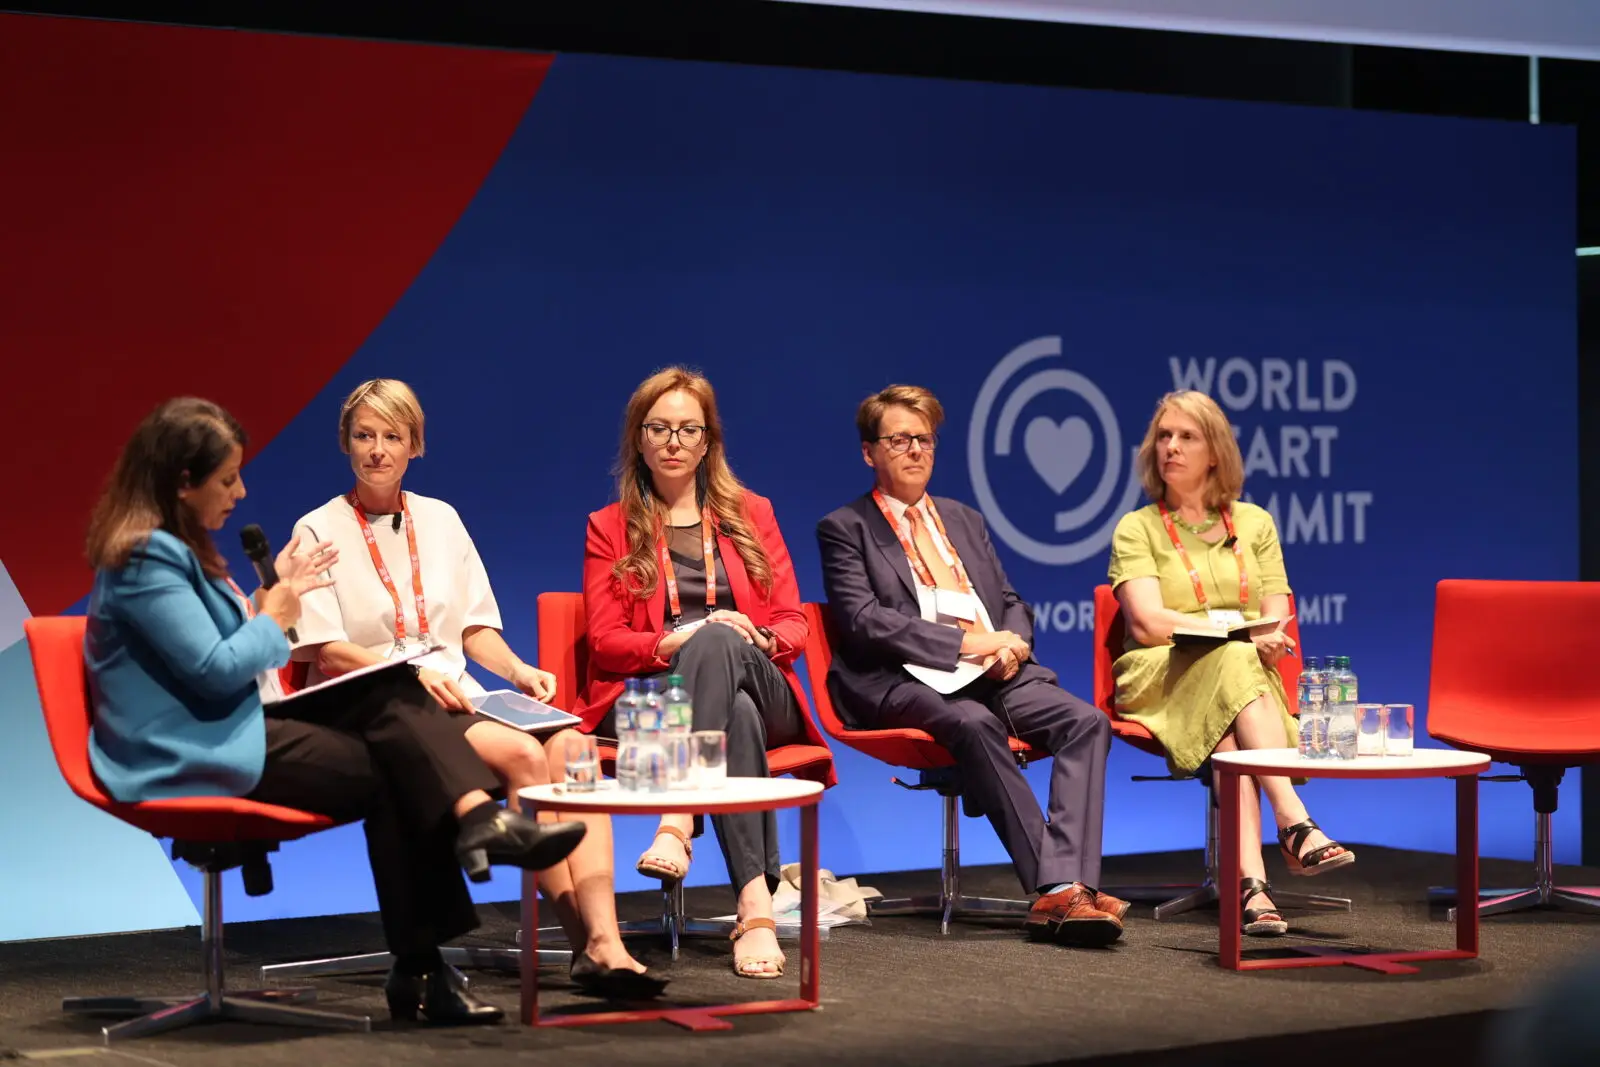 A group of heart professional joined in conversation at the World Heart Summit